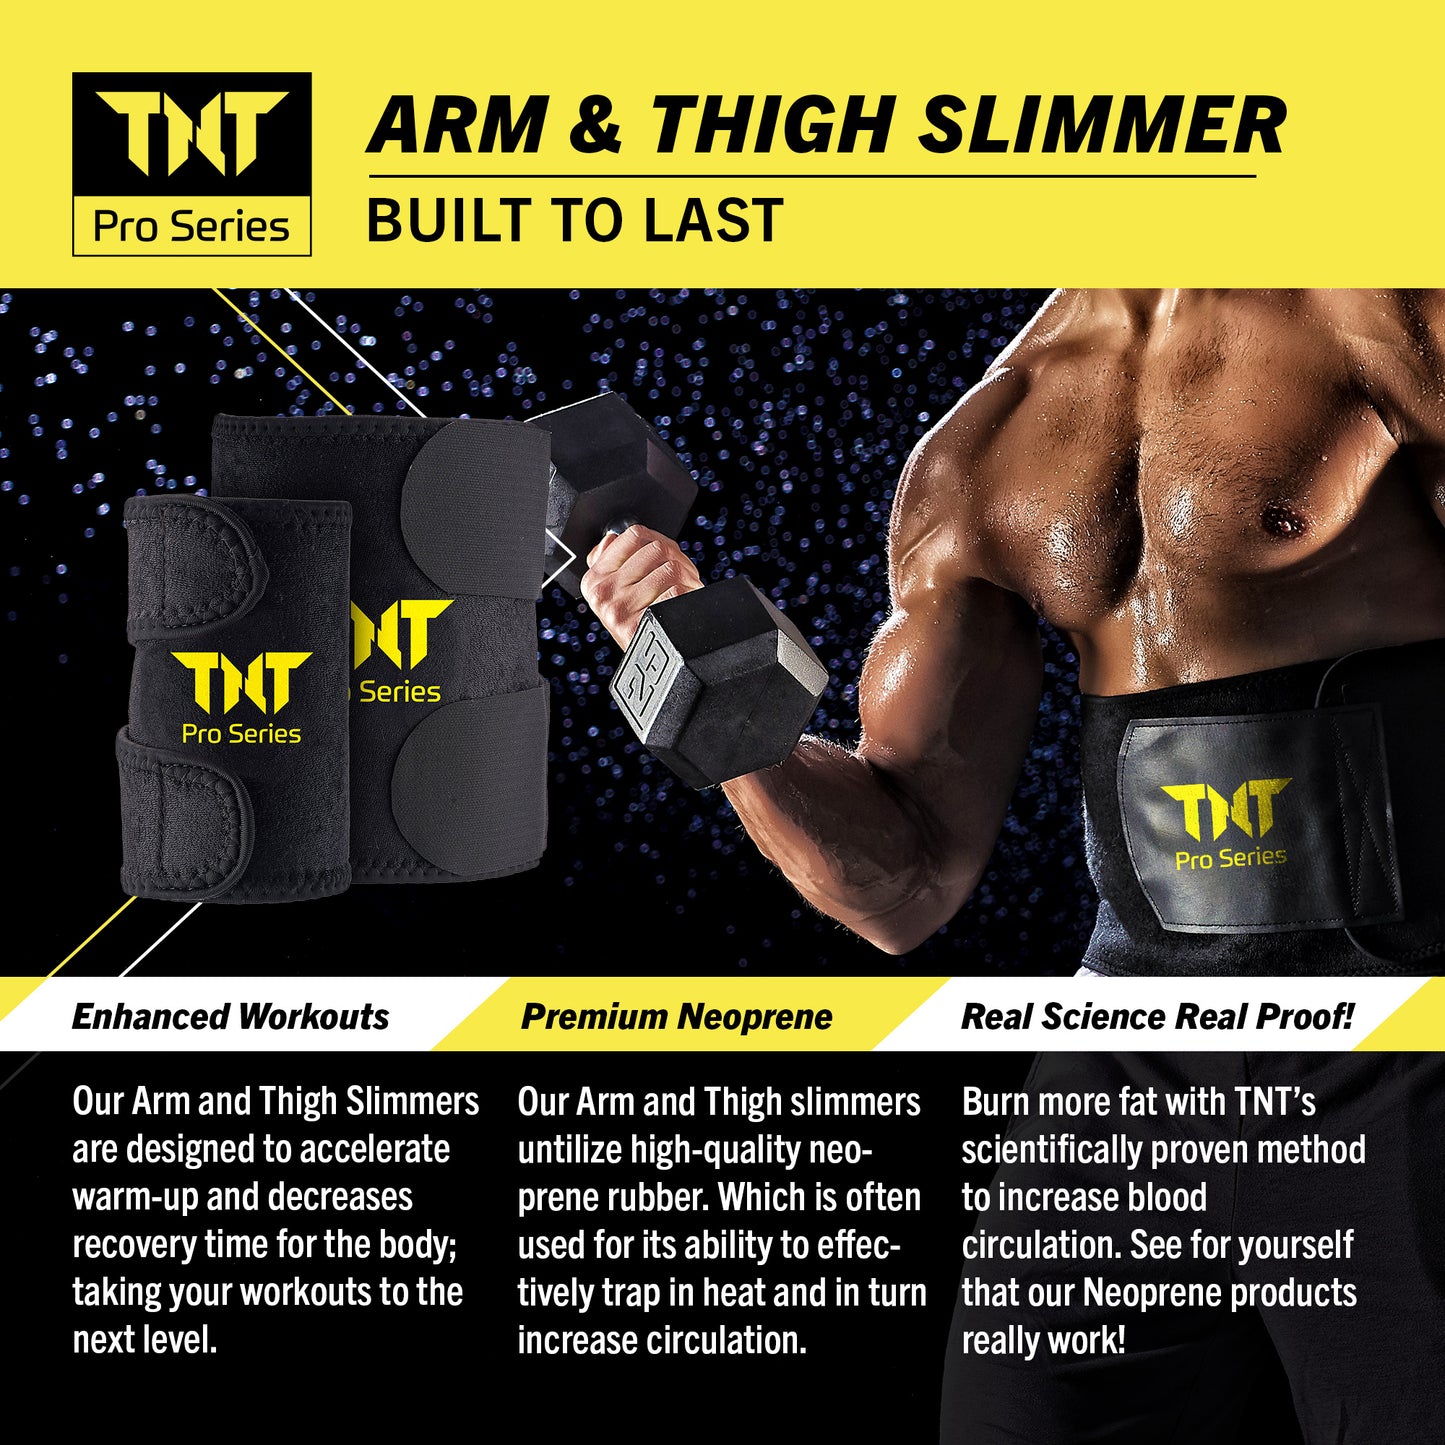 Arm & Thigh Slimmers - TNT Pro Series